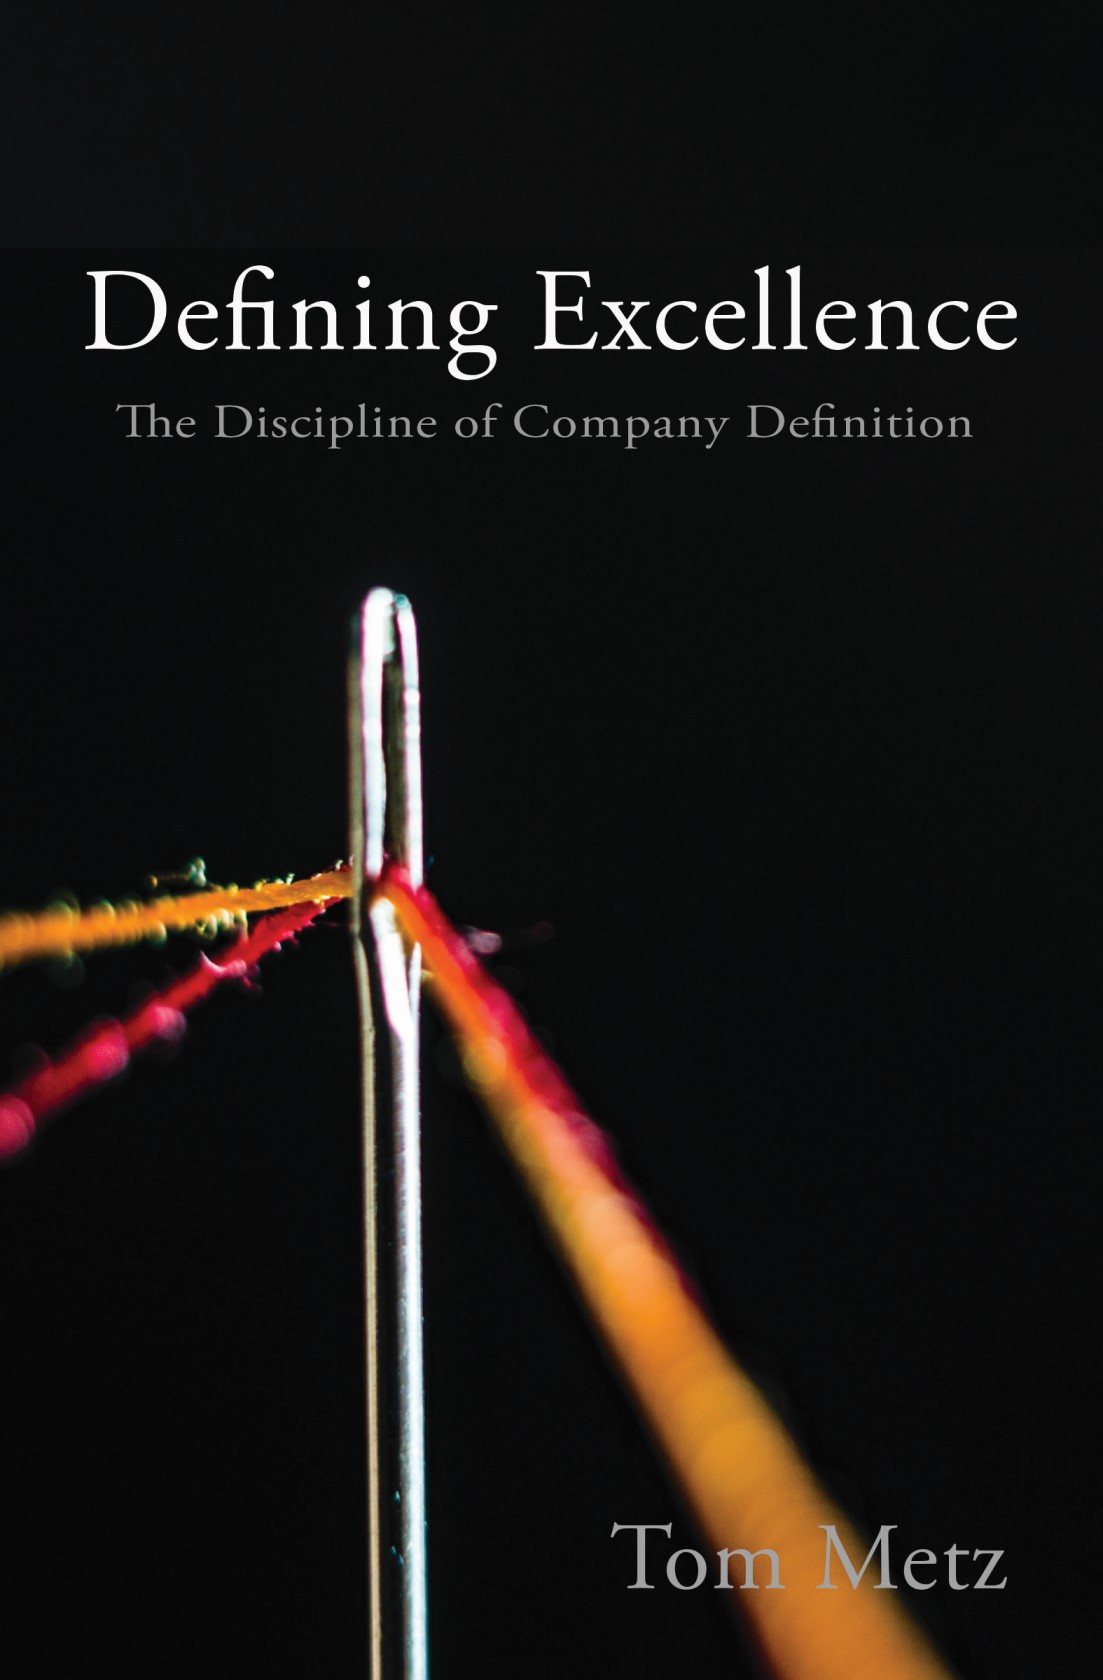 Defining Excellence